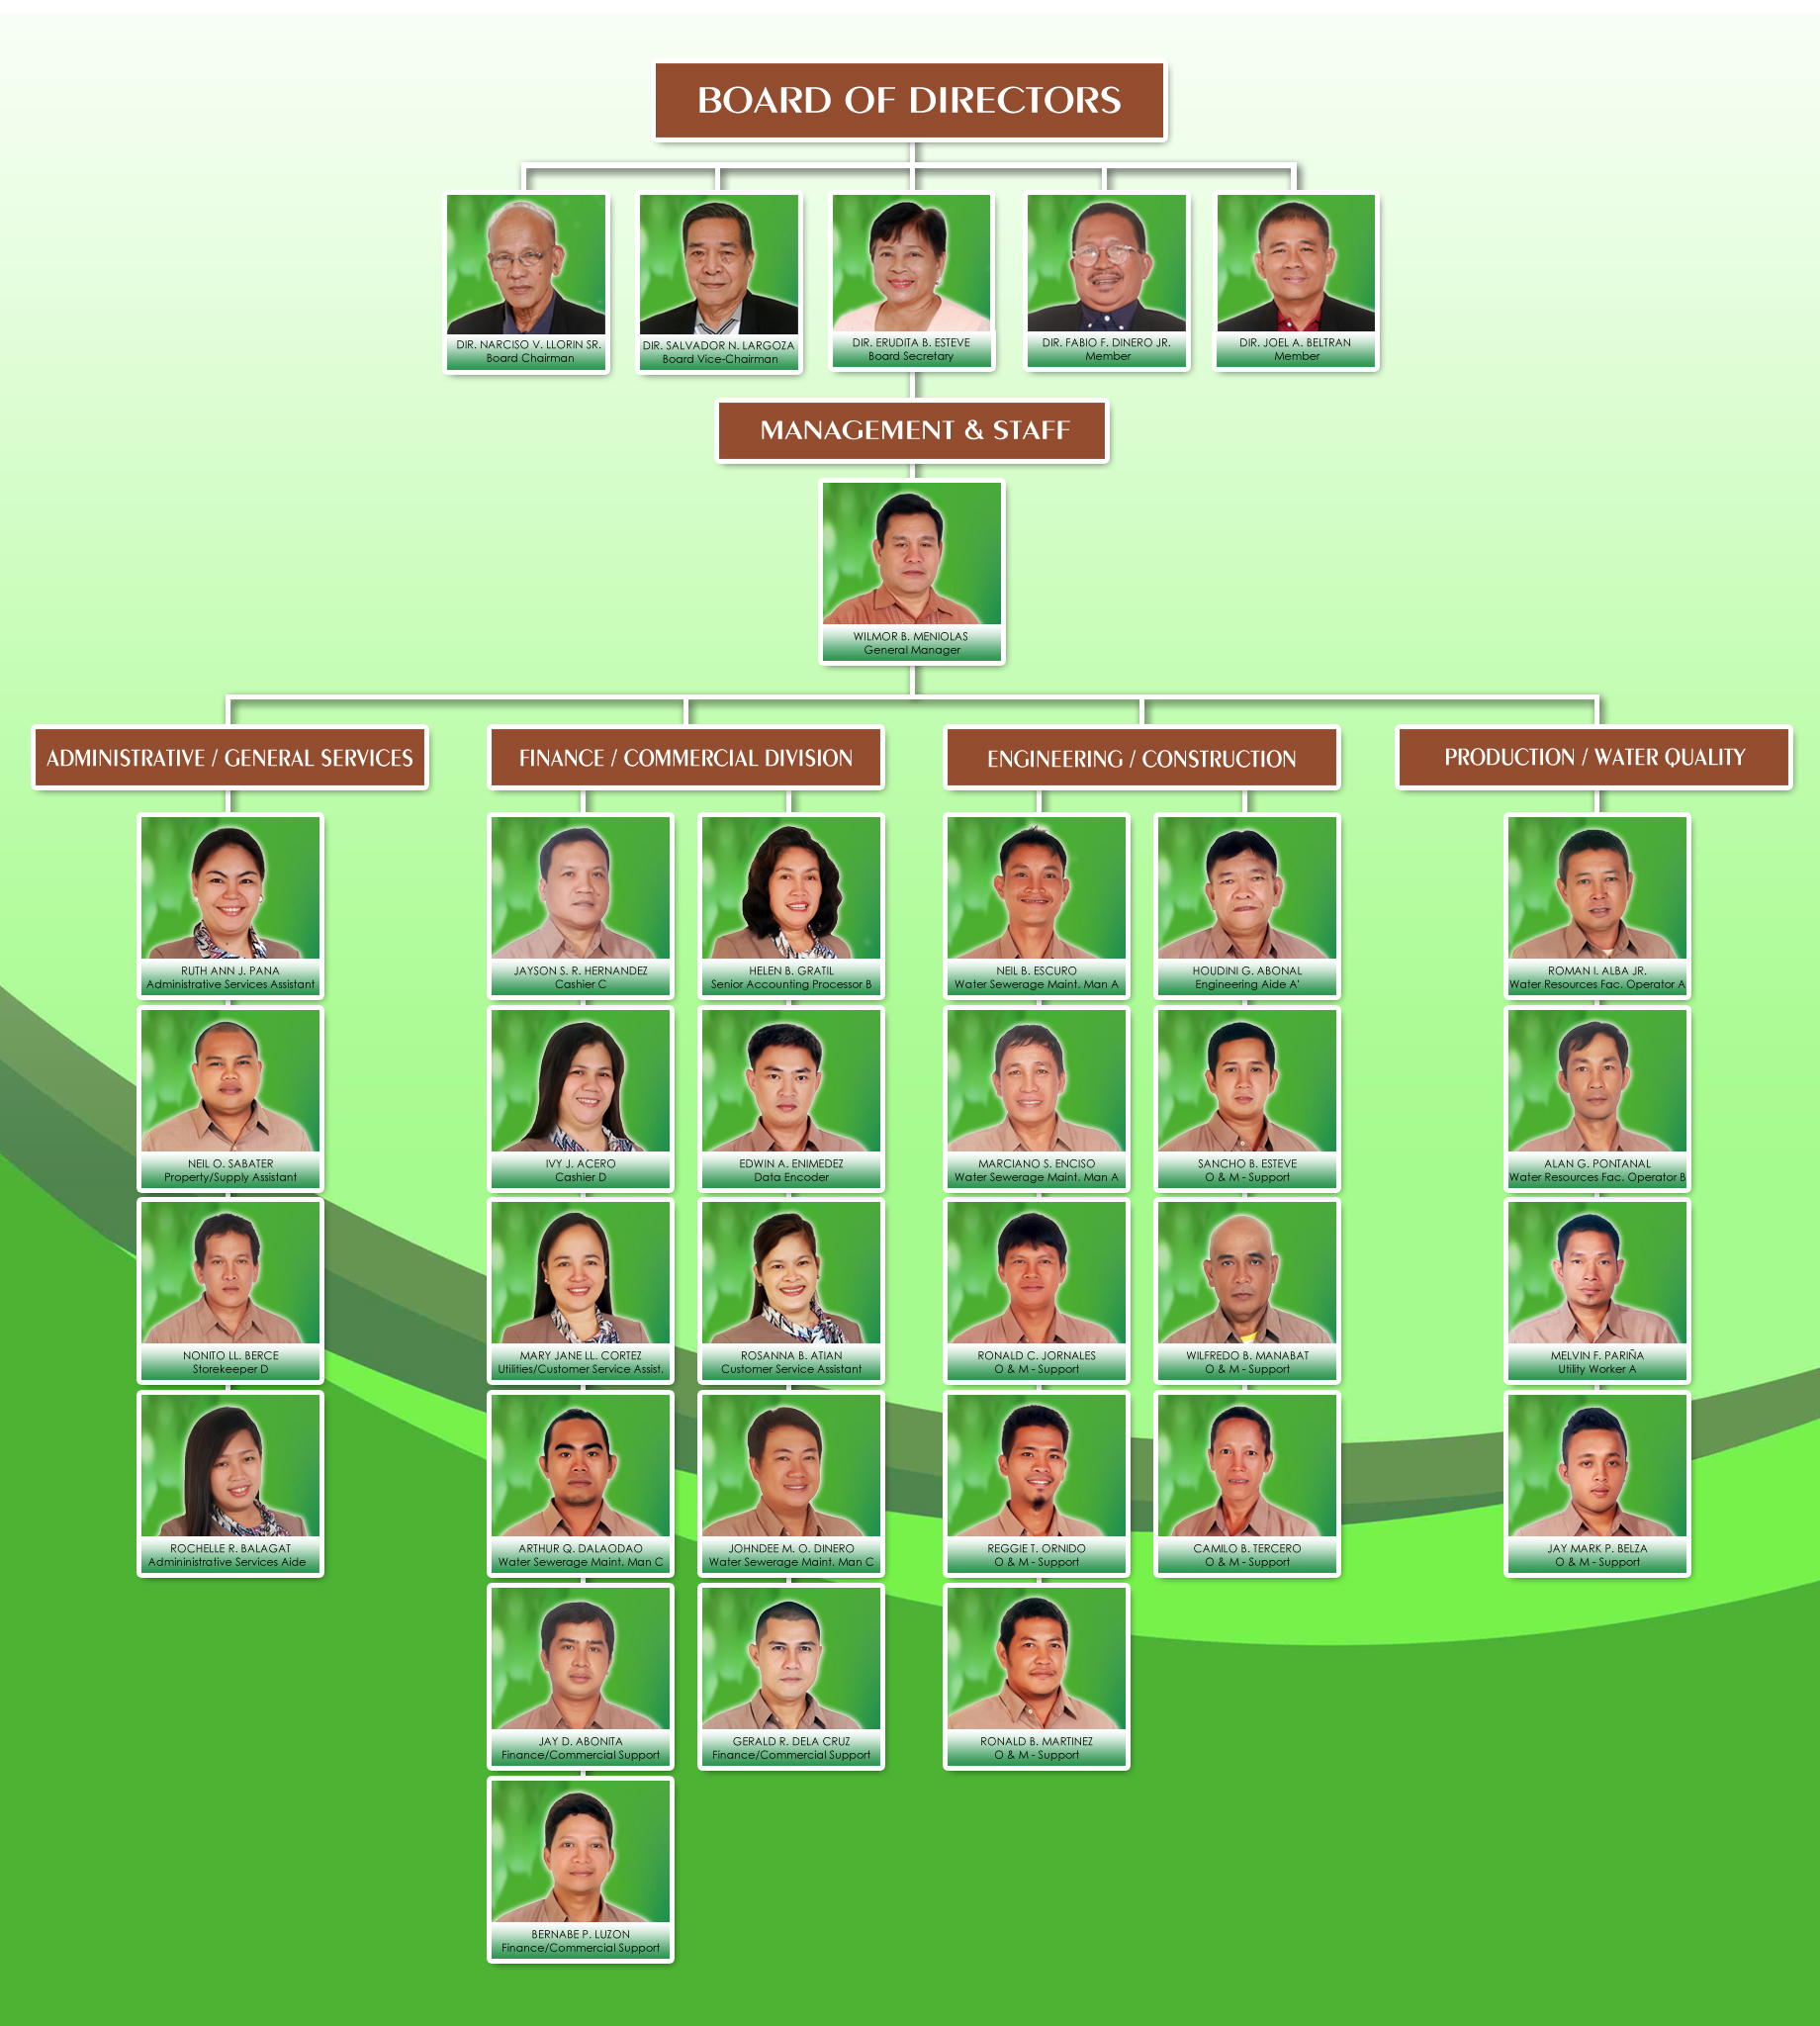 Dpwh Organizational Chart With Names